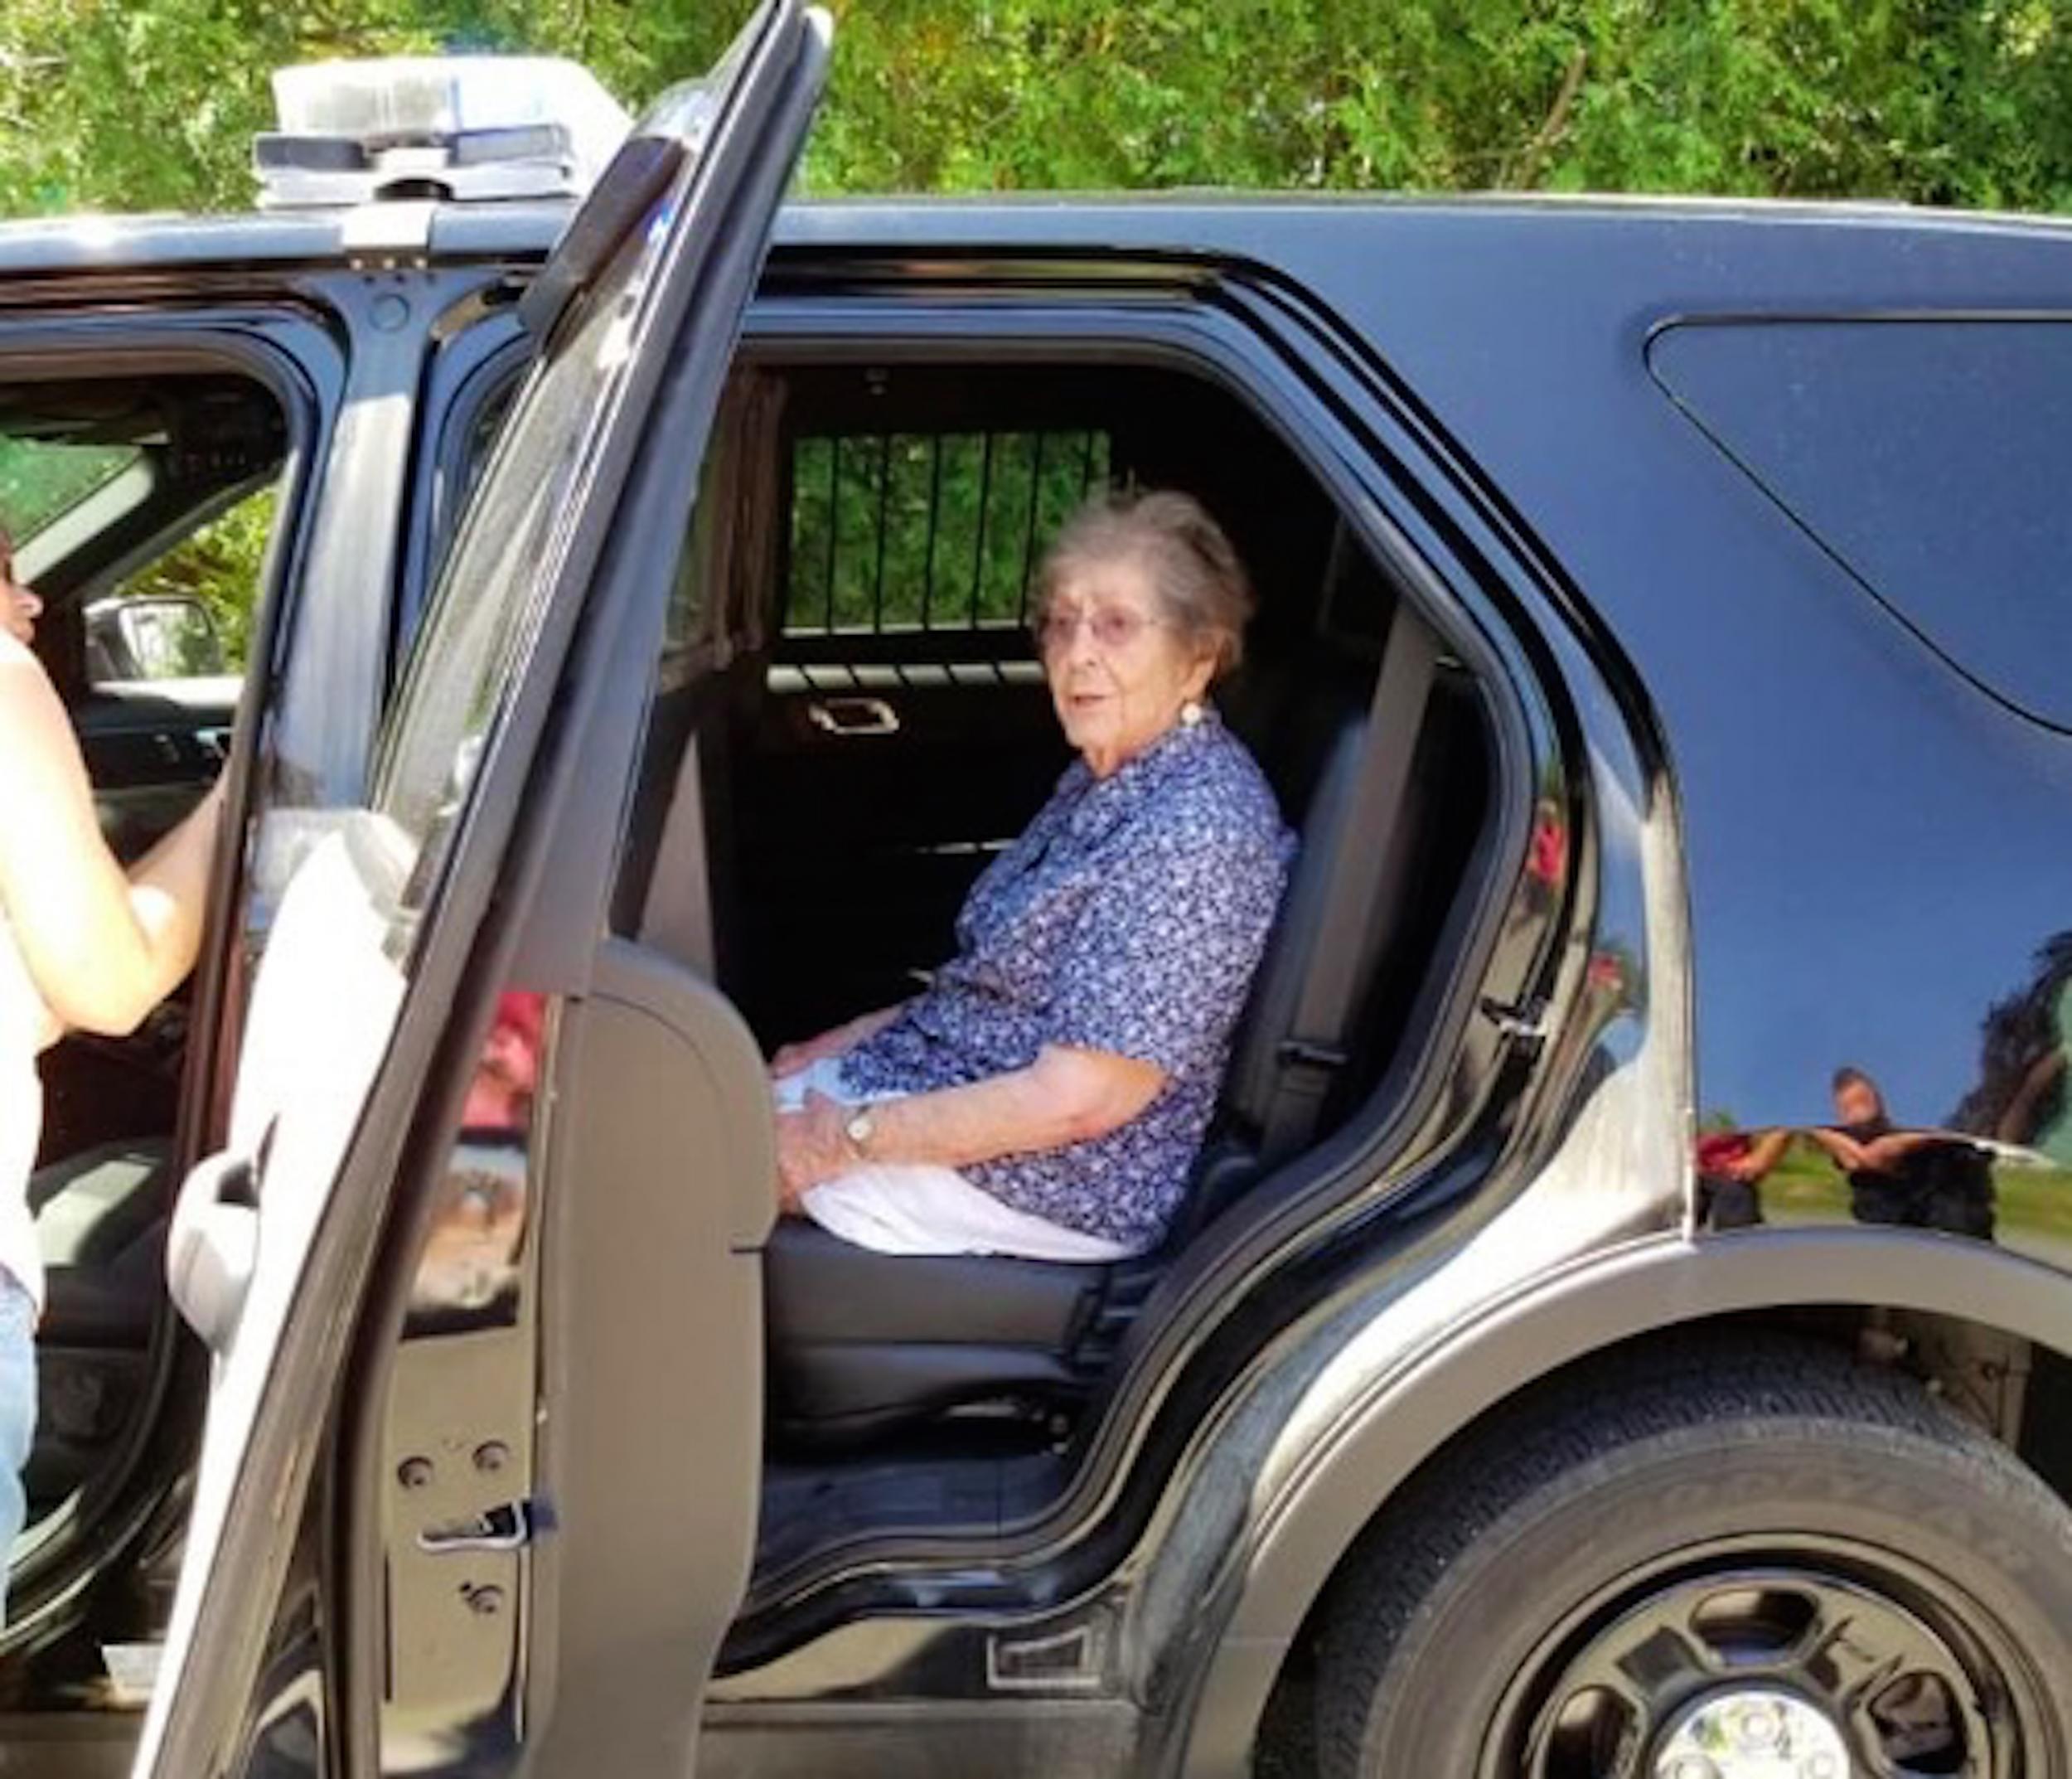 Elderly woman gets arrested on purpose during her 93rd birthday The Independent The Independent